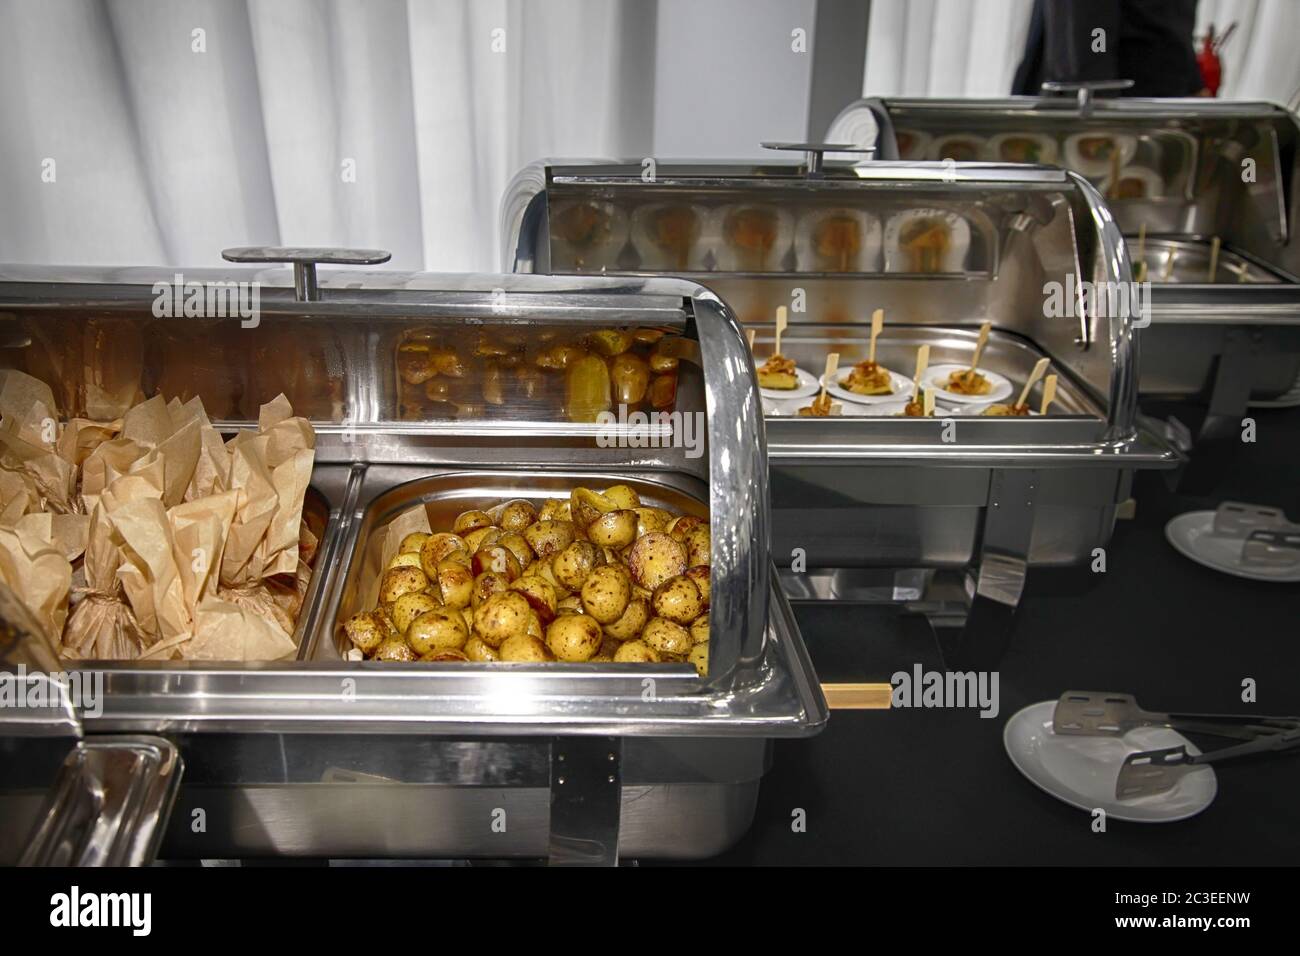 Catering buffet food with heated trays ready for service Stock Photo